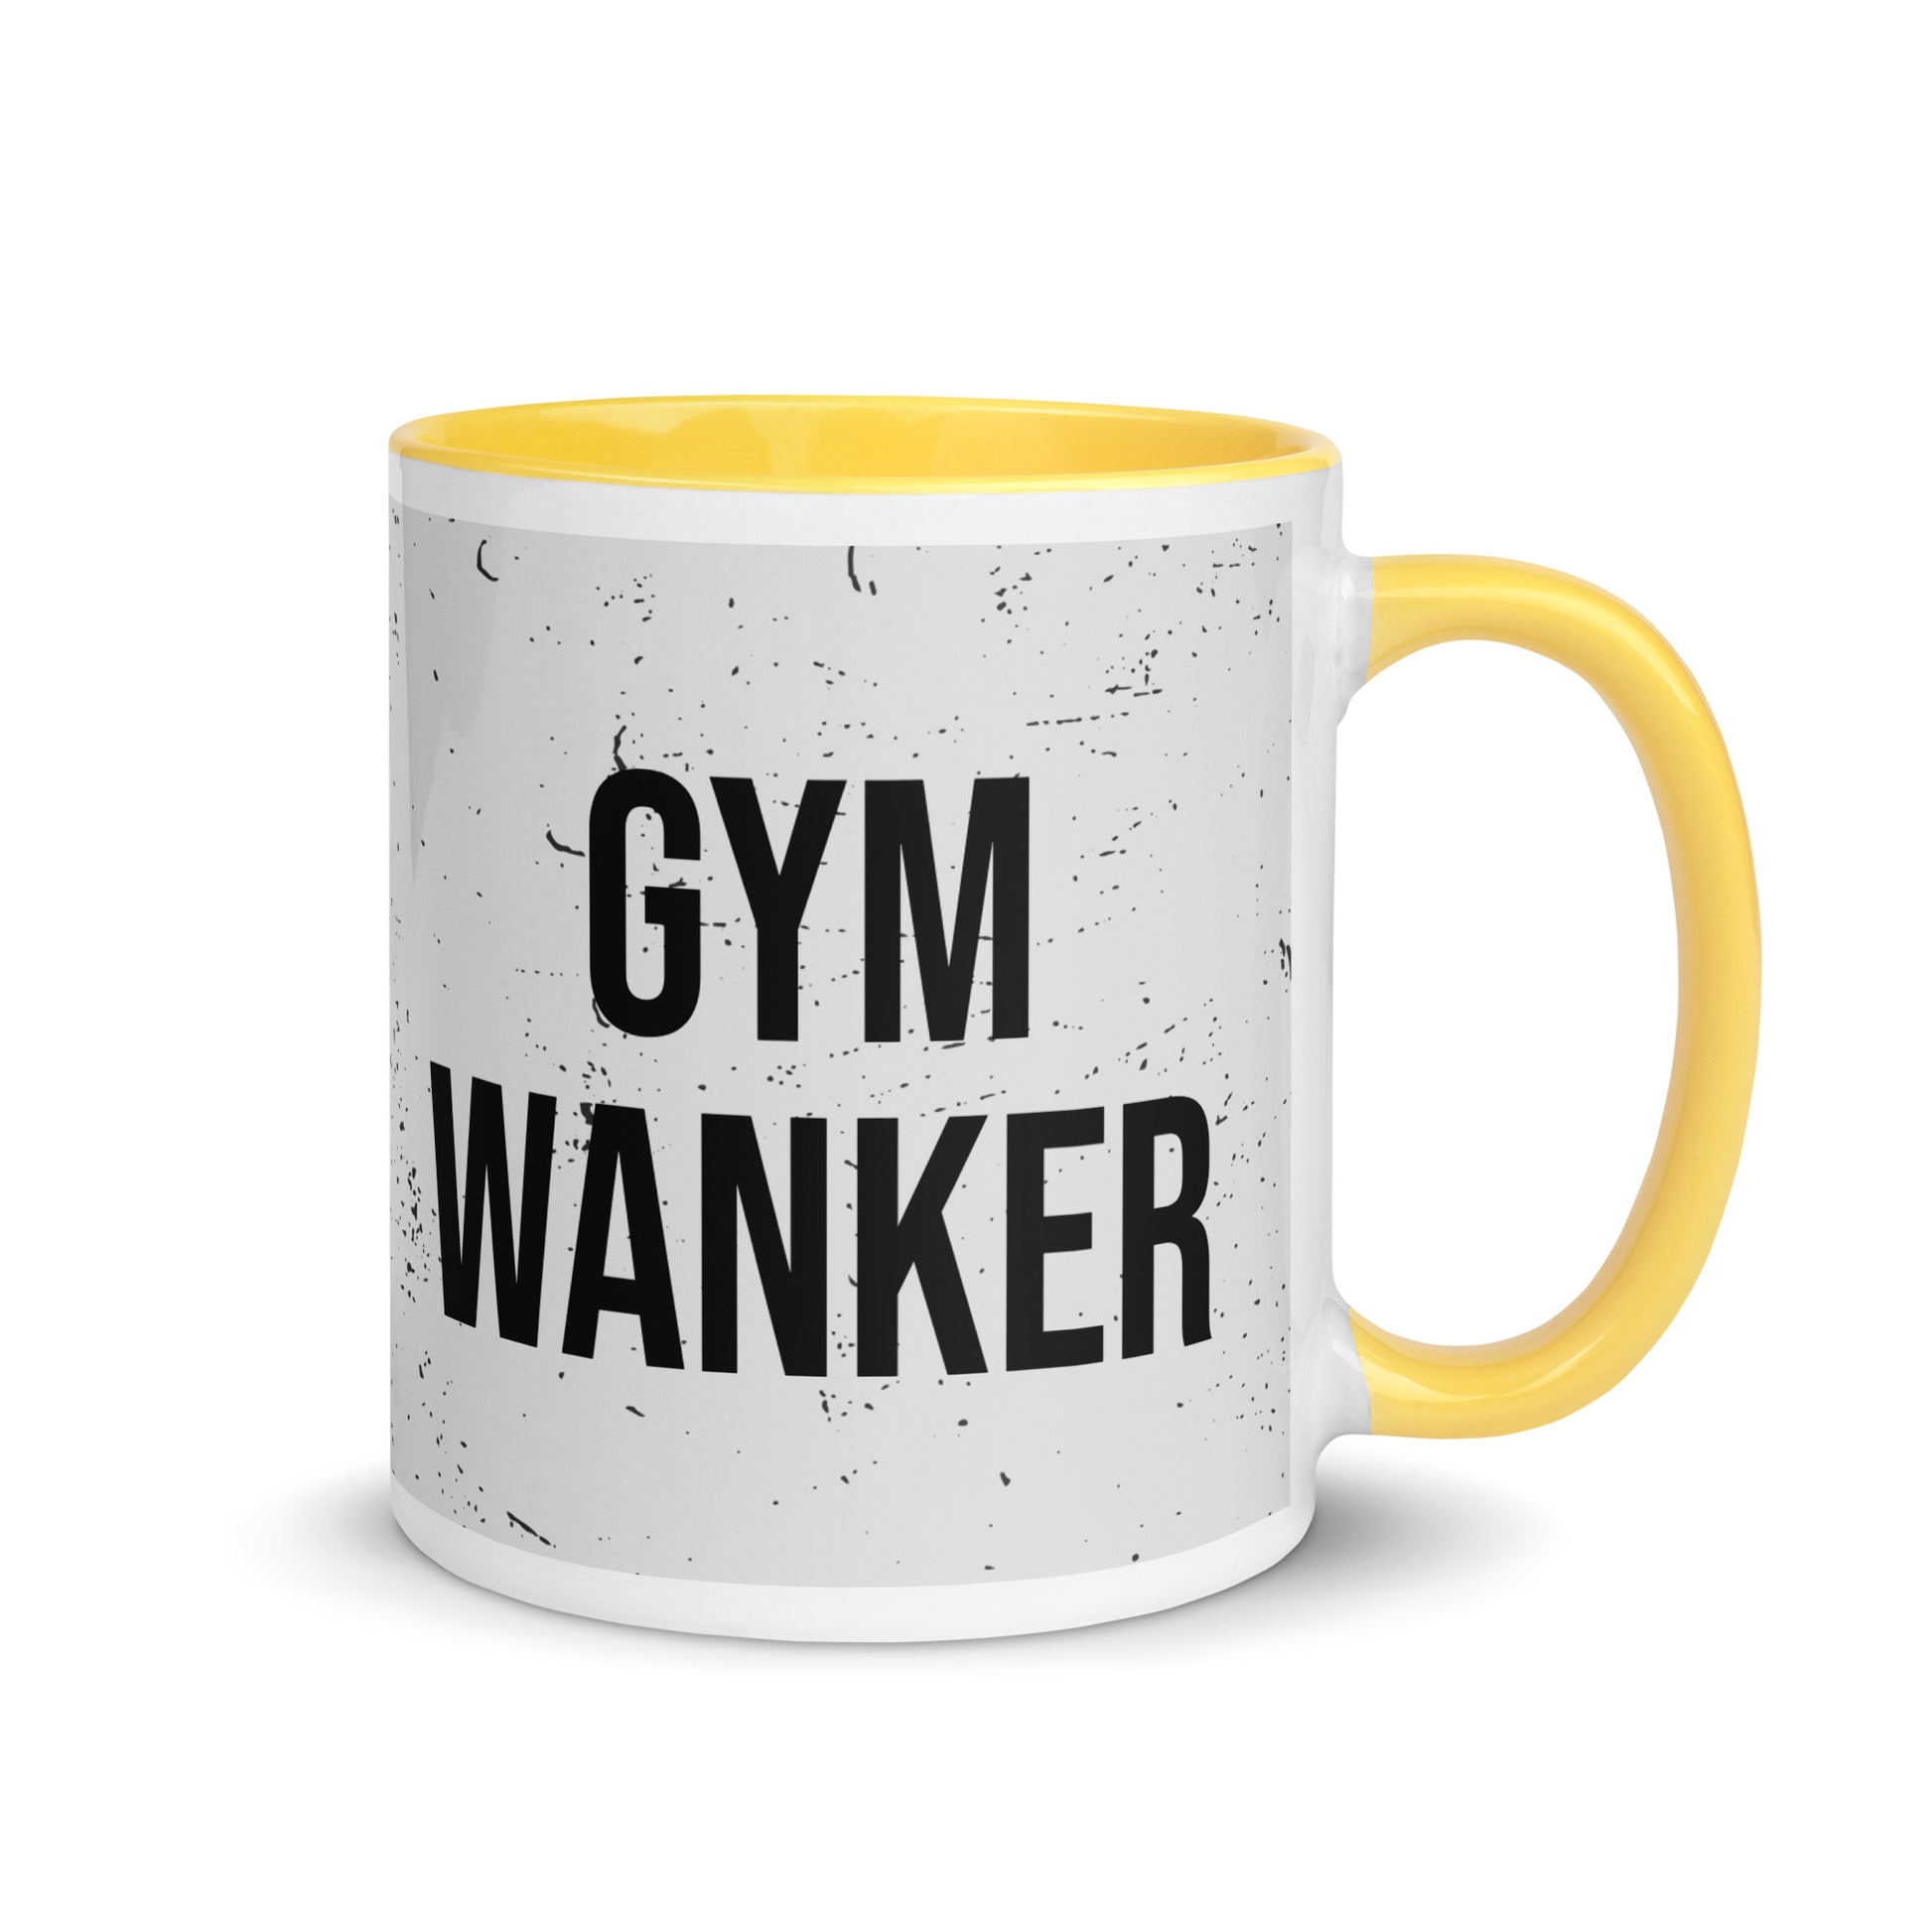 Yellow handled mug with gym wanker written on it, across a grey splatter background. A gift for someone who loves the gym.